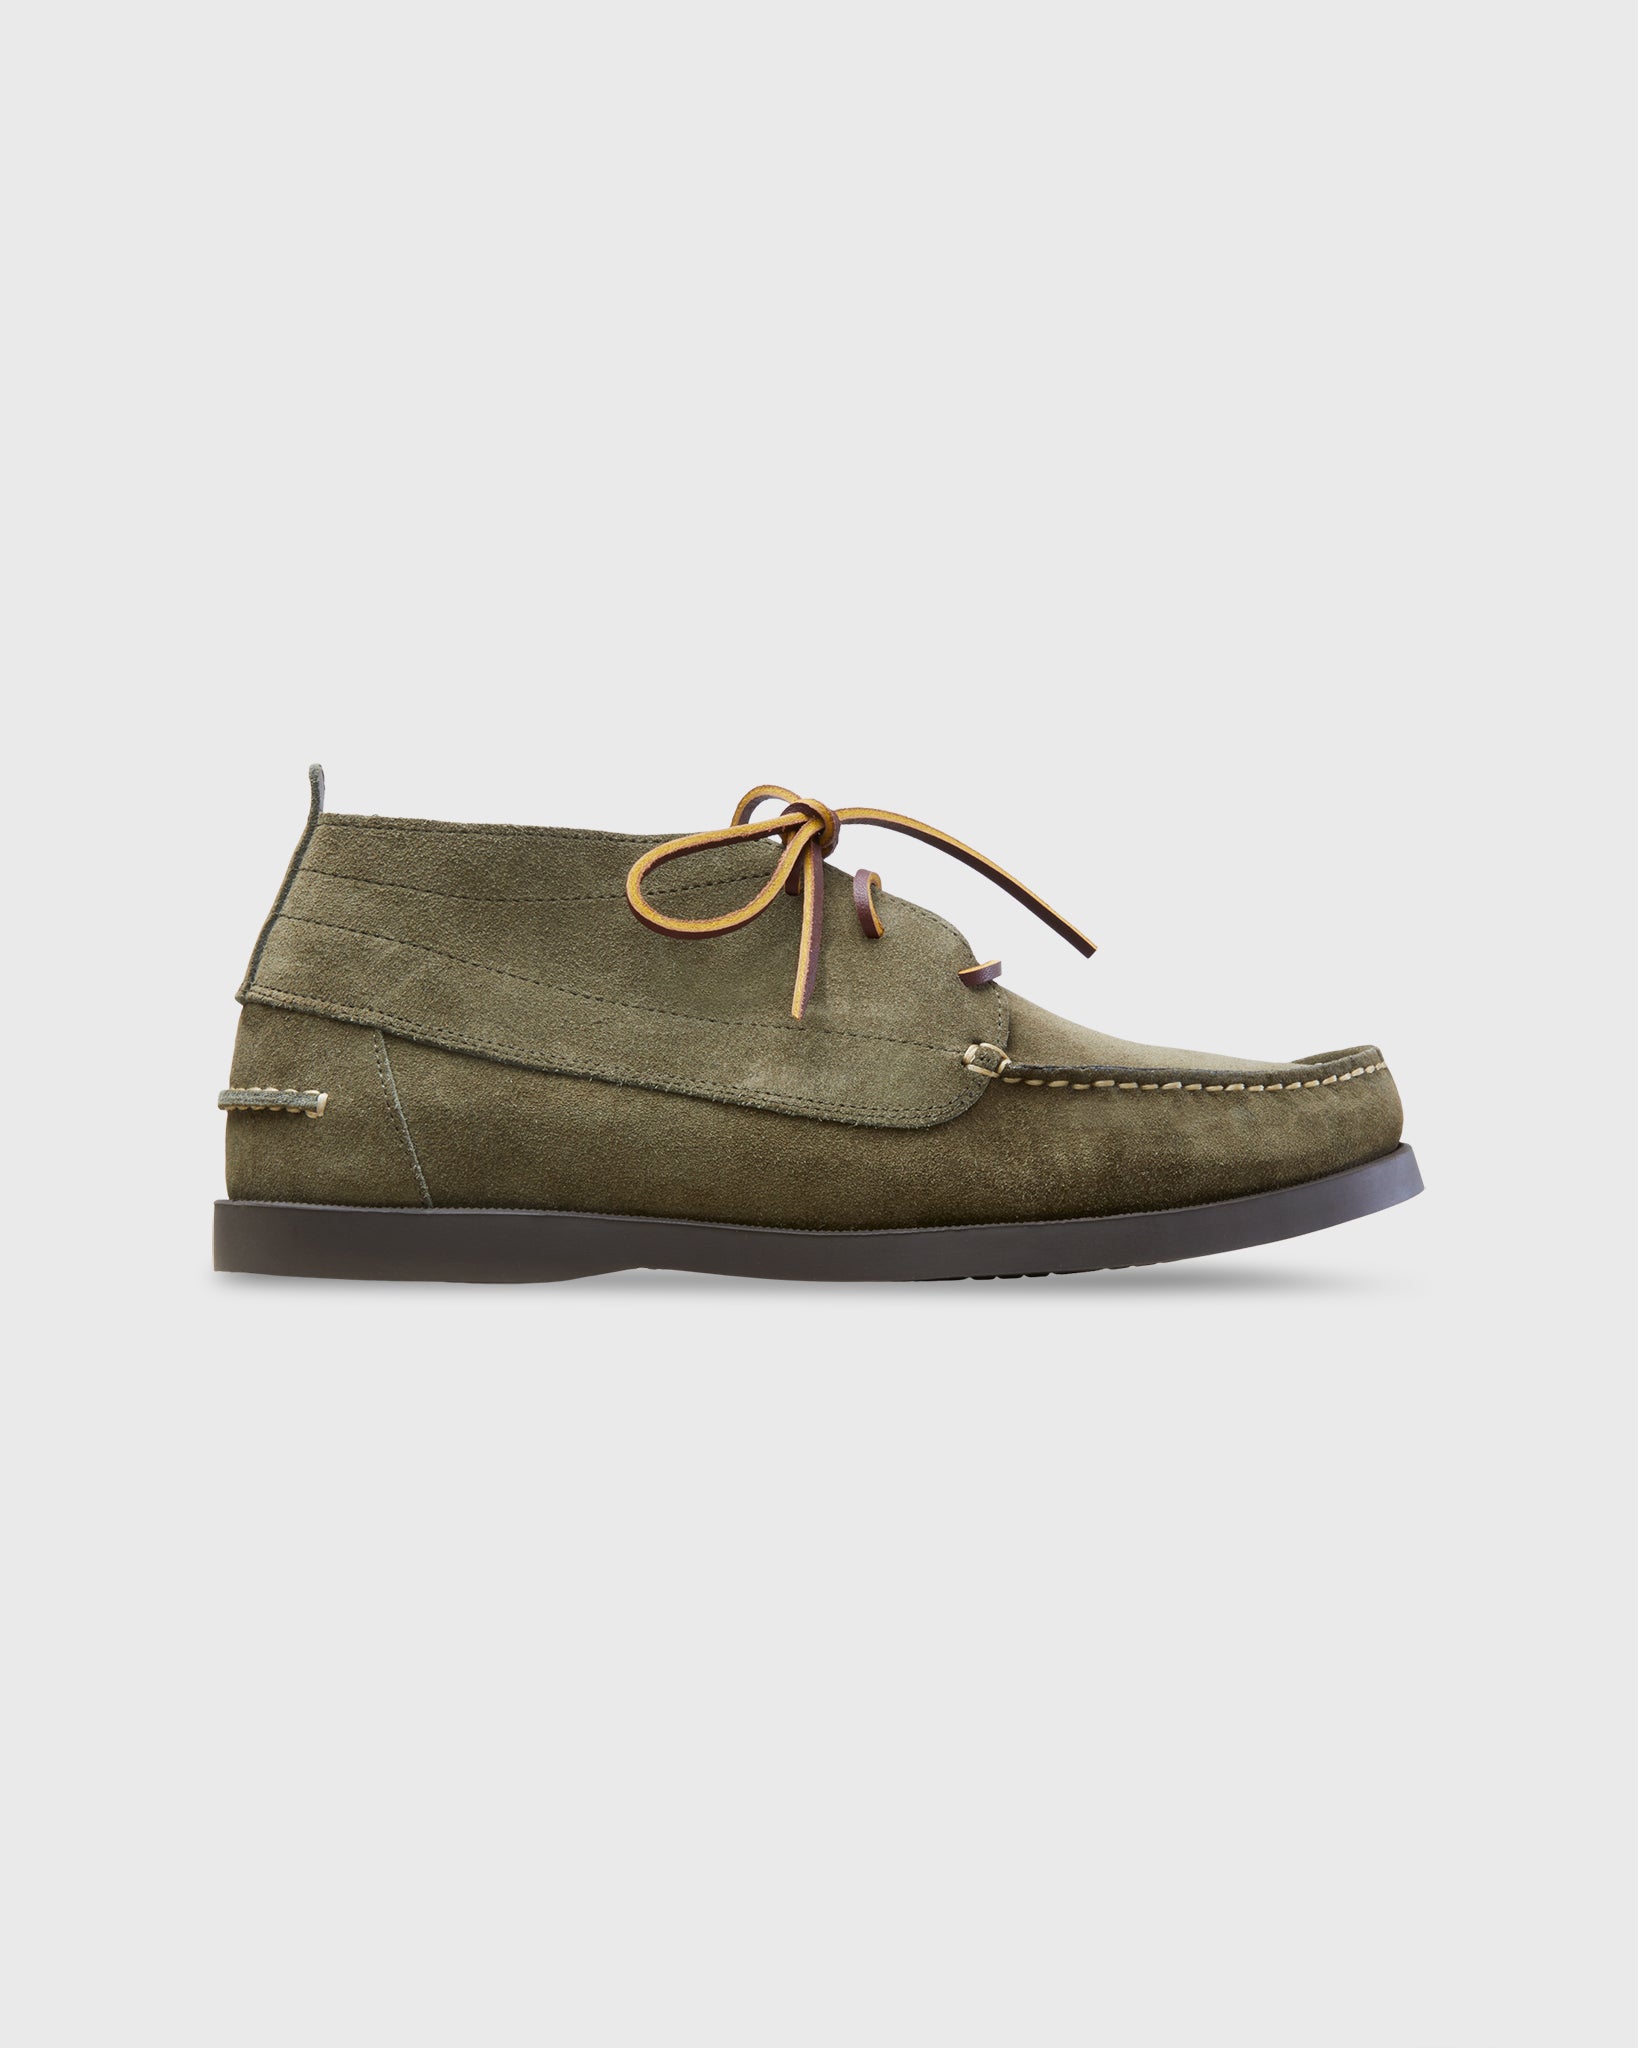 Chukka Camp Moccasin in Olive Suede